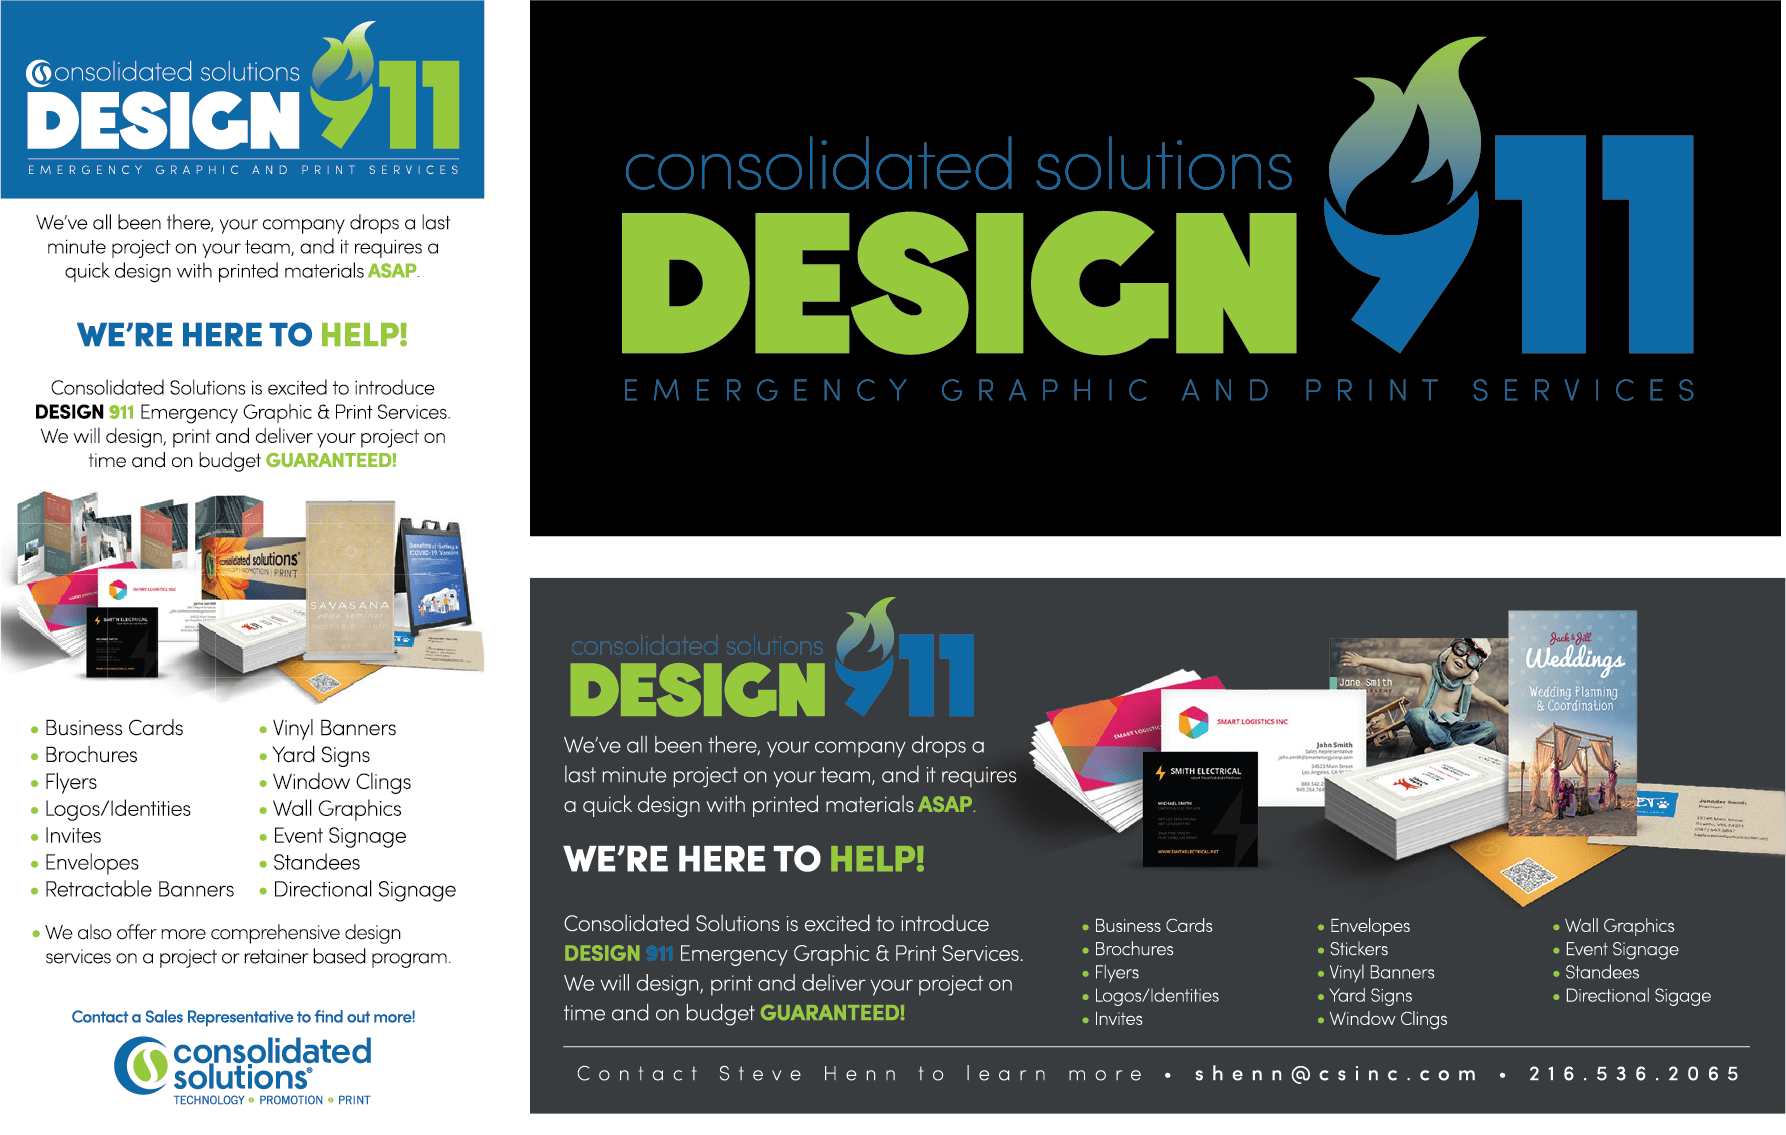 Corporate collateral created through our creative services team